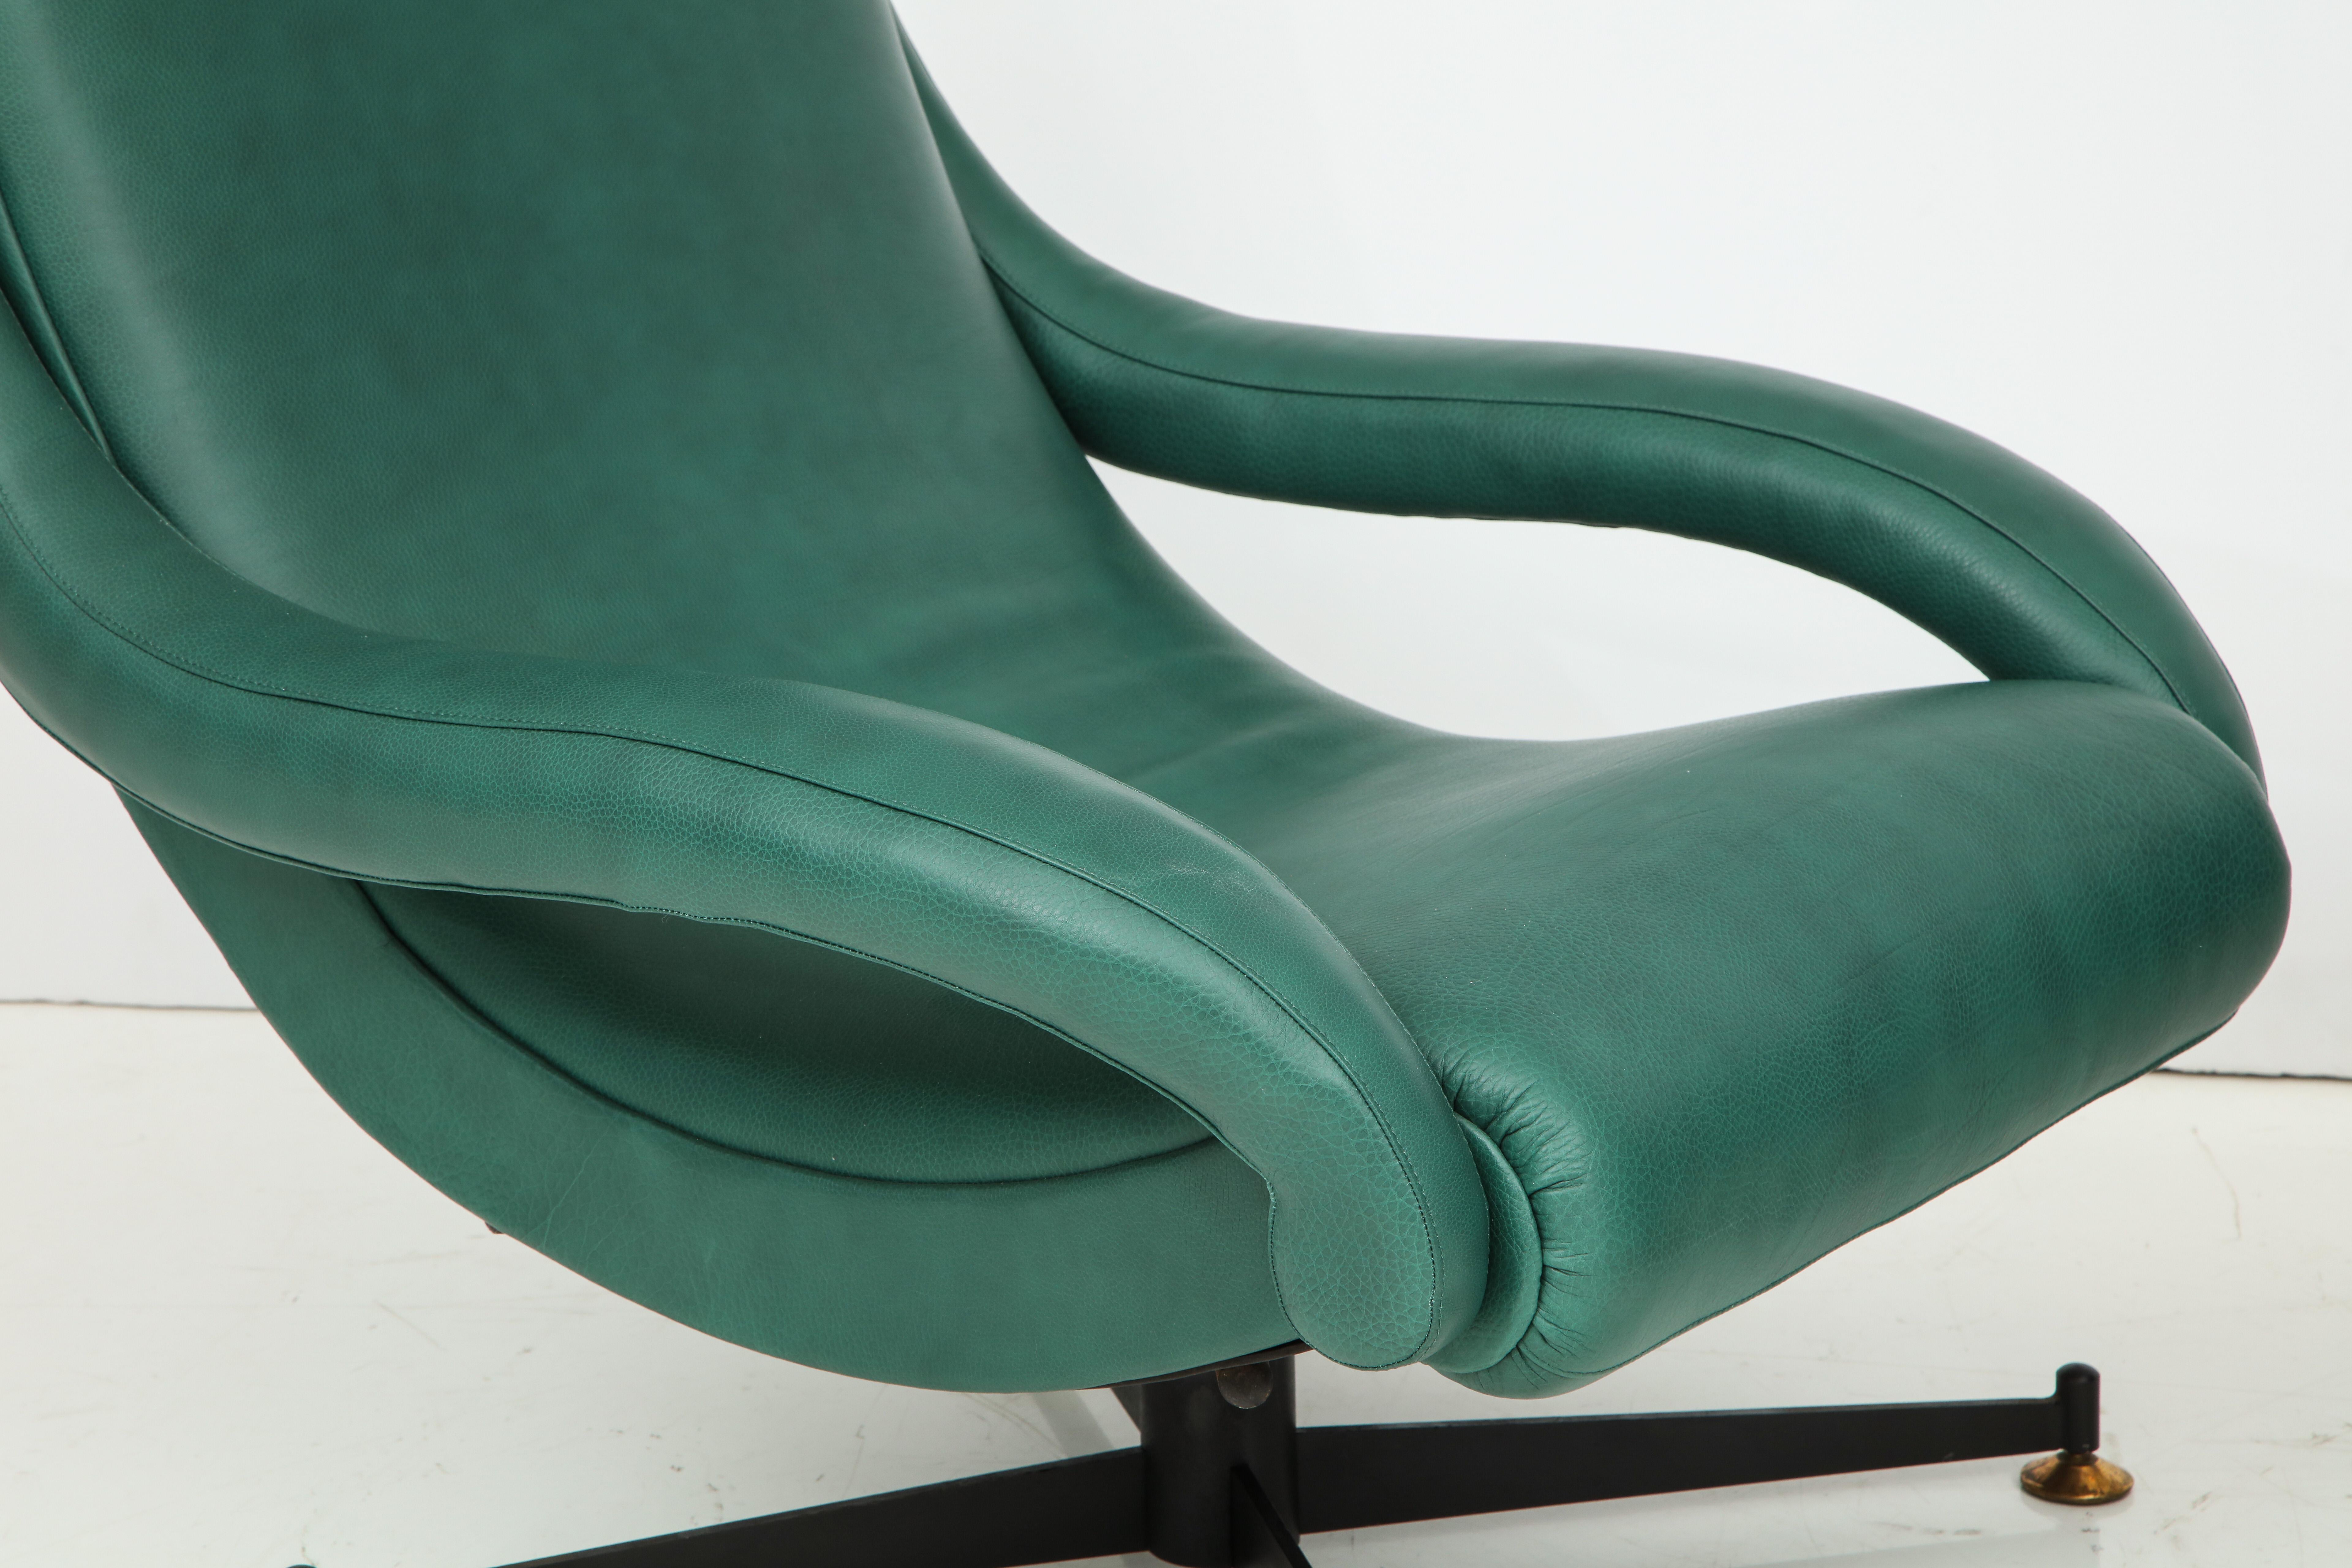 Pair of Lounge Chairs in Gucci Green Leather by Radice for Lenzi, c. 1950, Italy 7